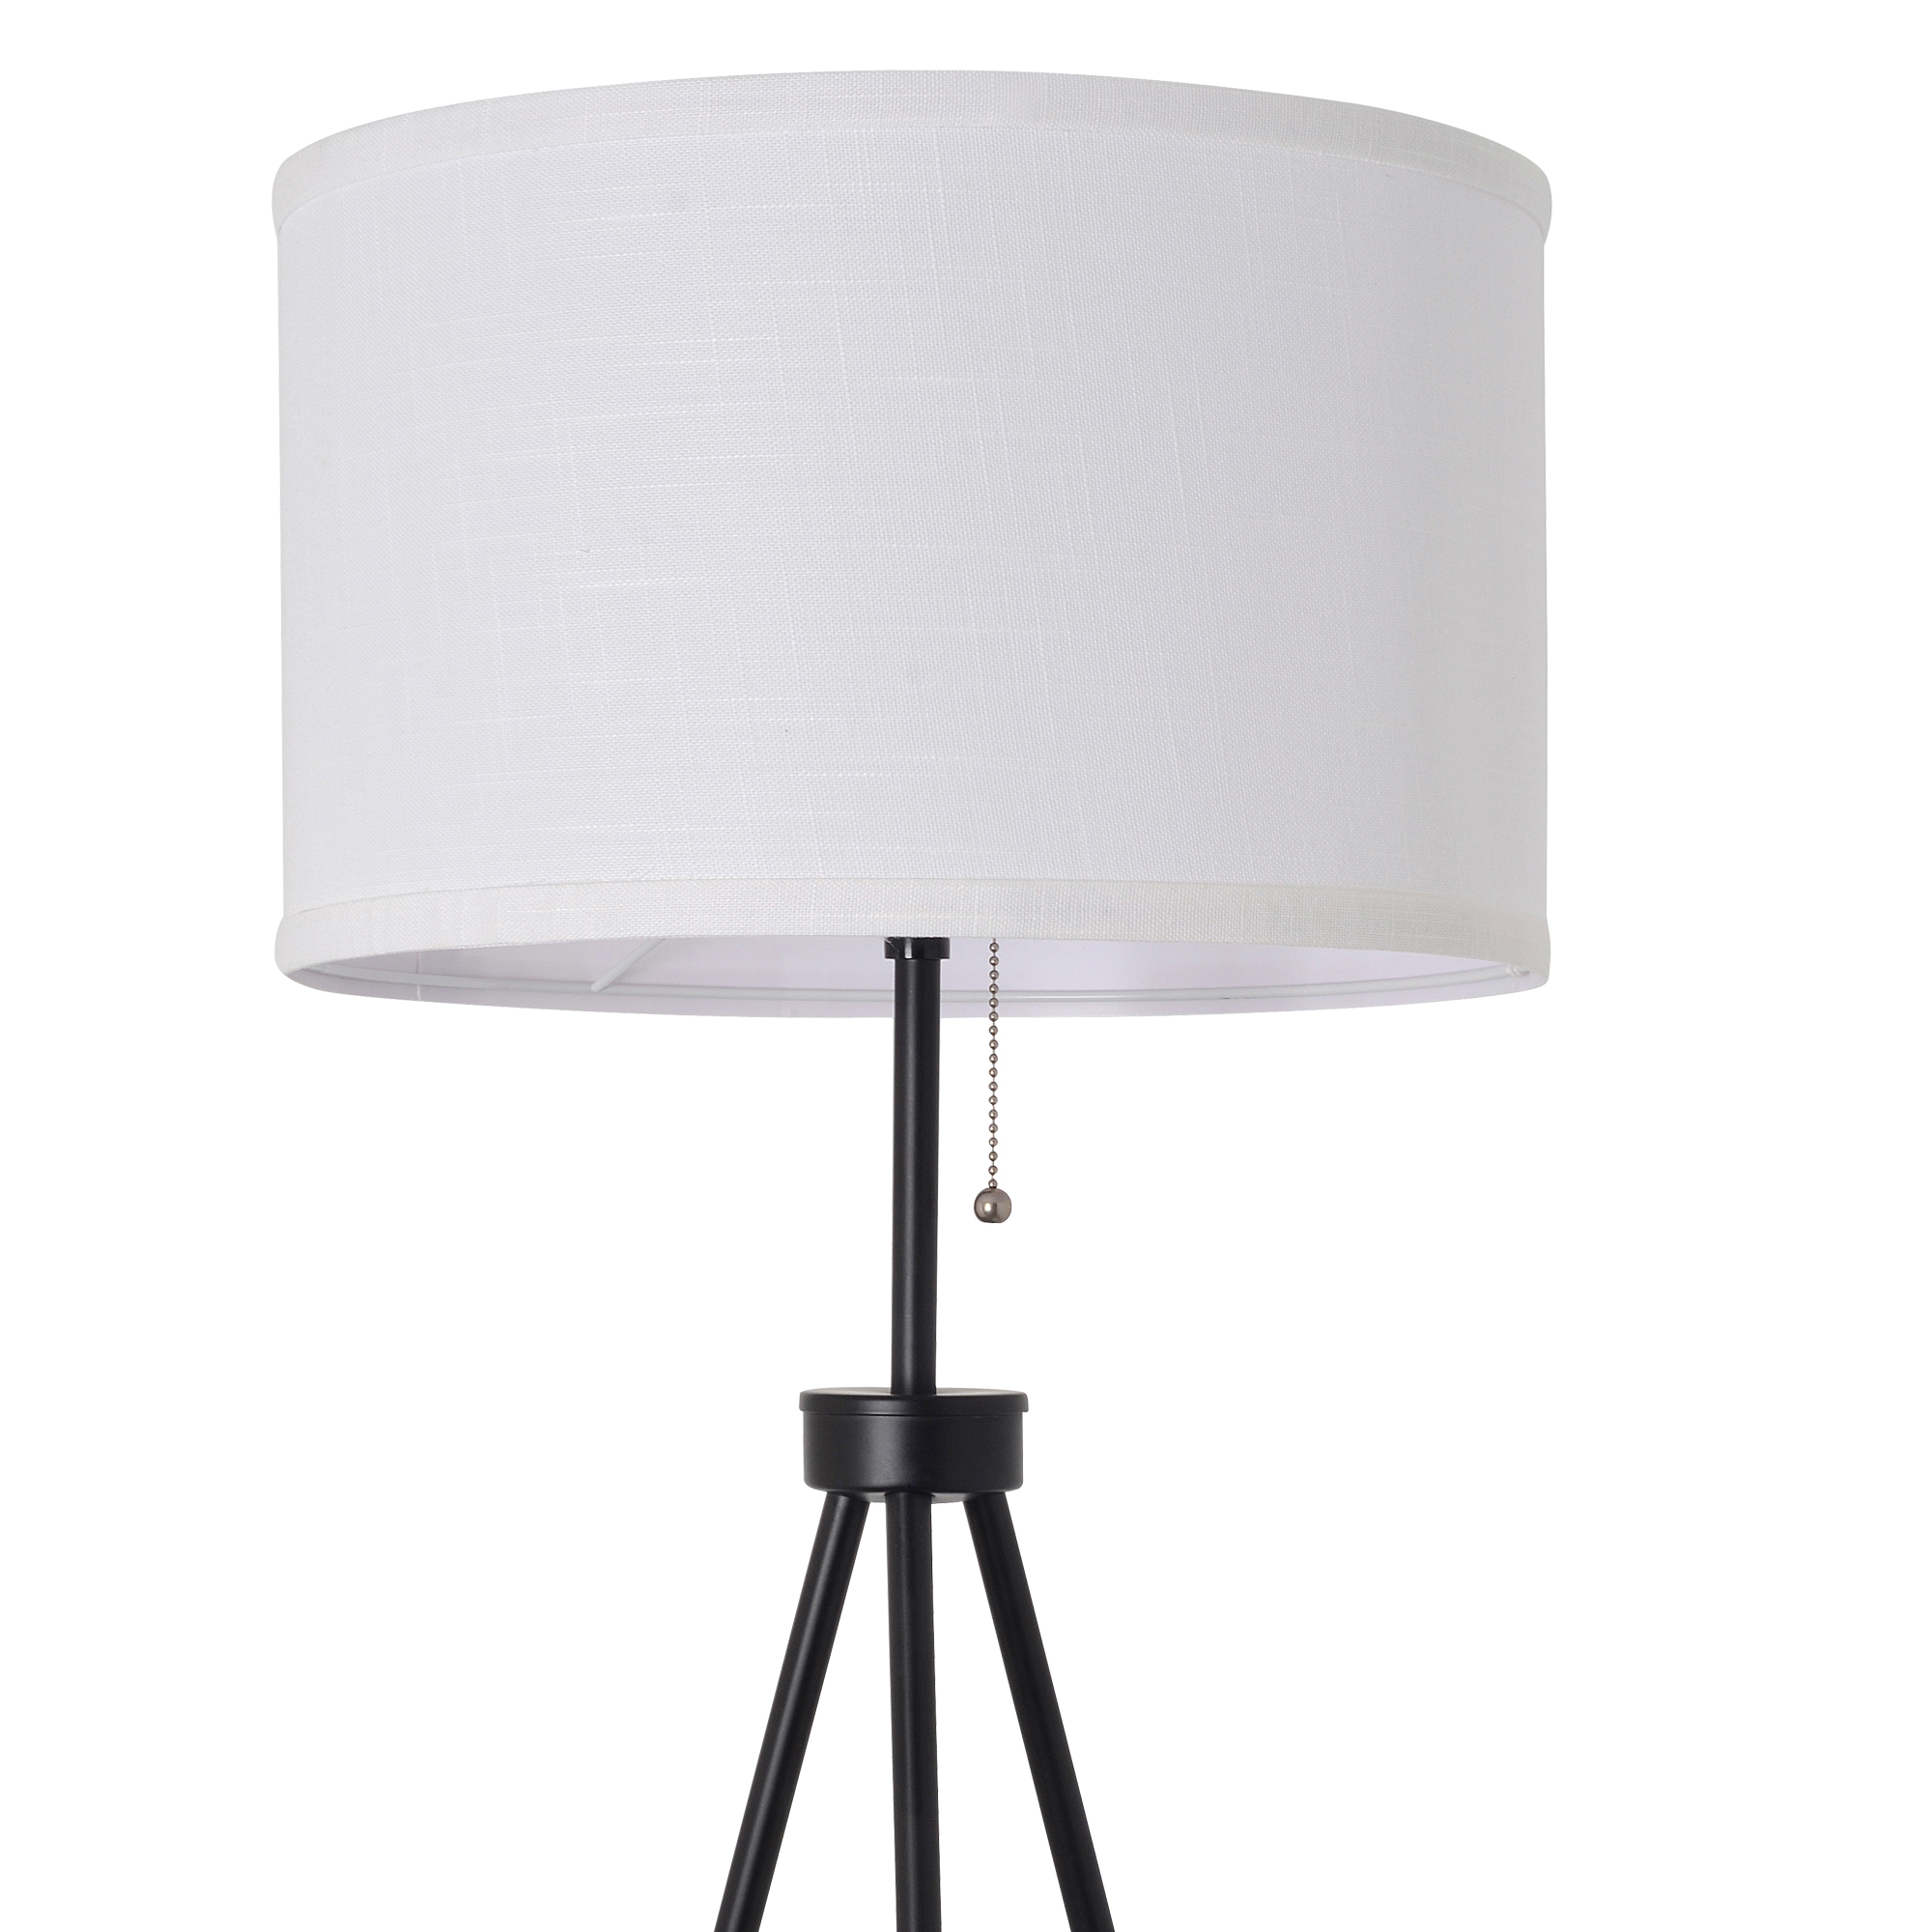 Mainstays 58" Black Metal Tripod Floor Lamp, Modern, Young Adult Dorms and Adult Home Office Use. - image 3 of 5